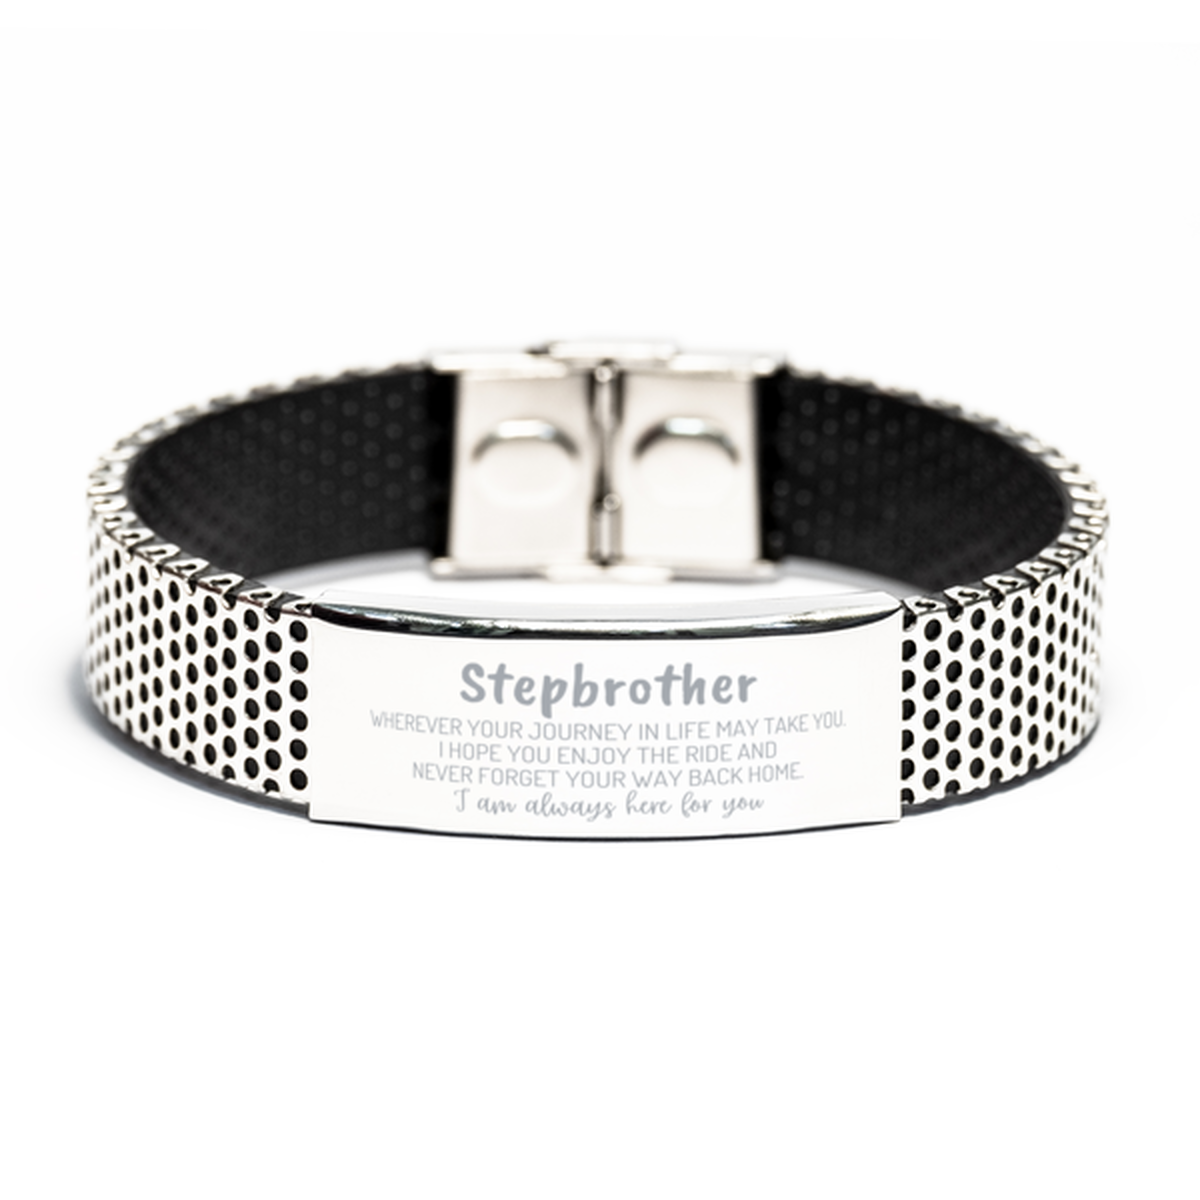 Stepbrother wherever your journey in life may take you, I am always here for you Stepbrother Stainless Steel Bracelet, Awesome Christmas Gifts For Stepbrother, Stepbrother Birthday Gifts for Men Women Family Loved One